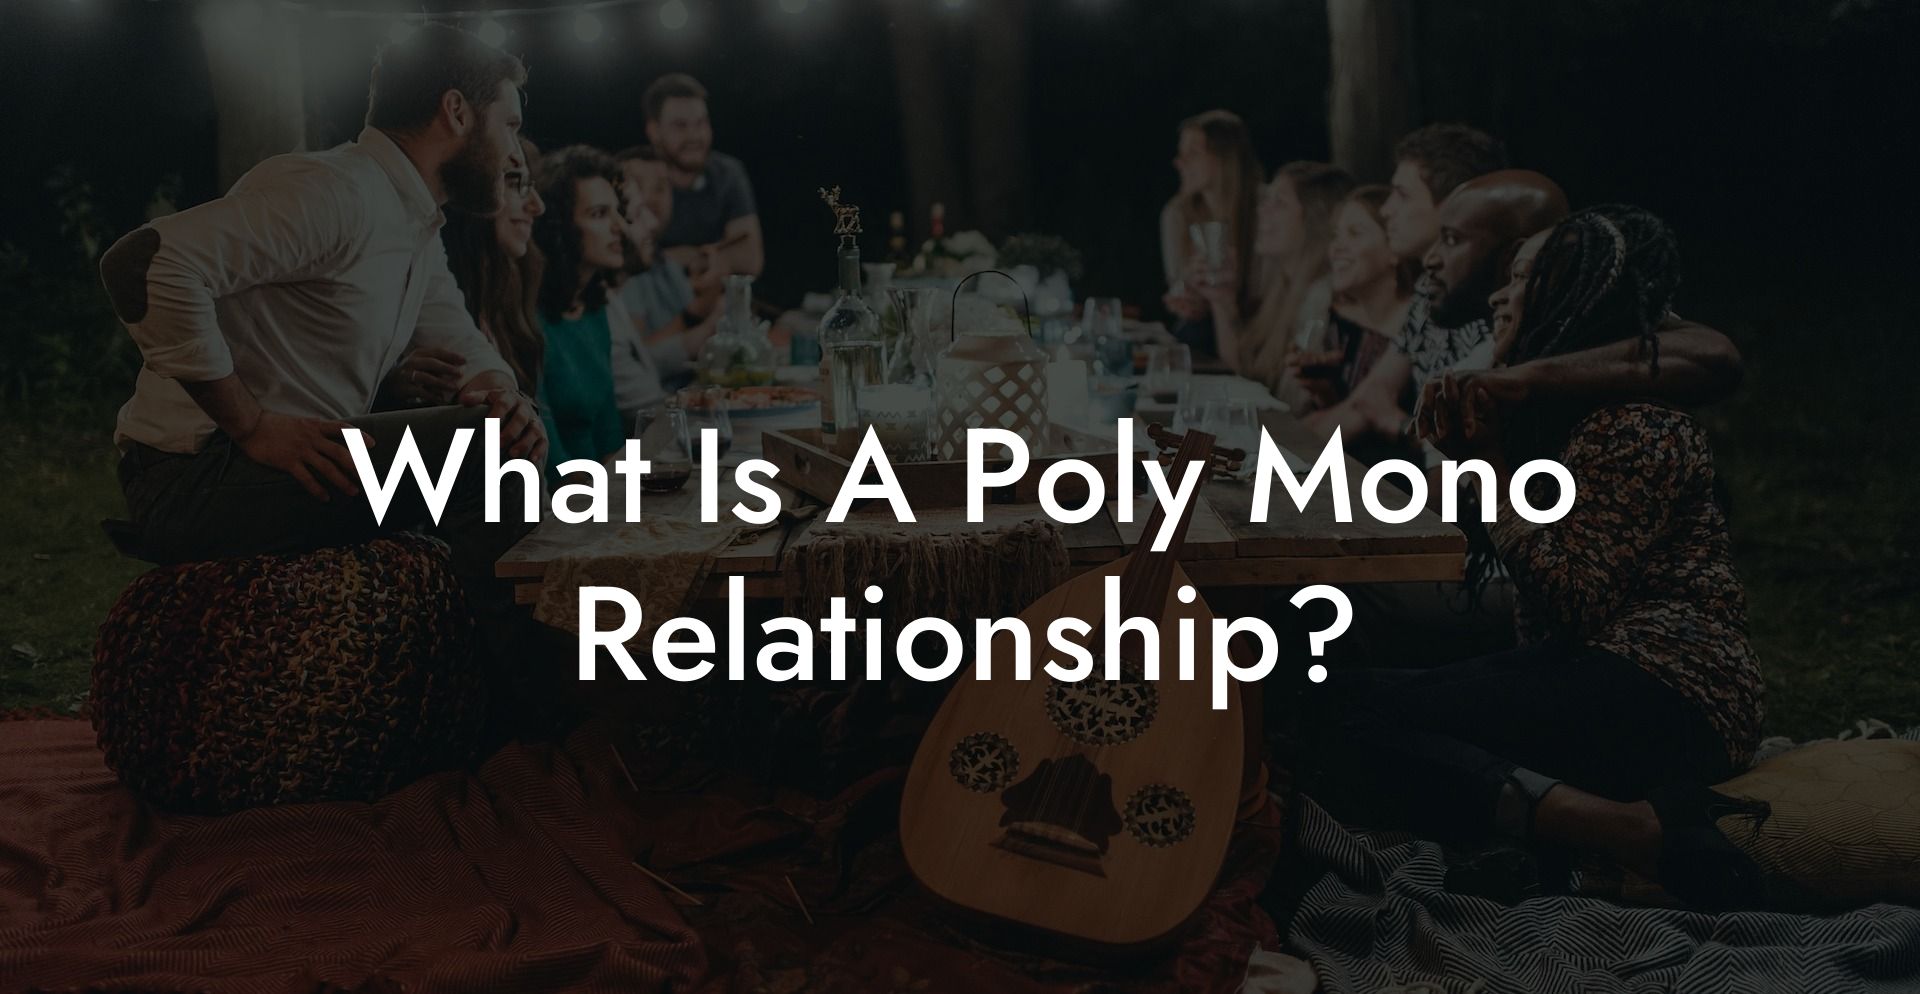 What Is A Poly Mono Relationship?